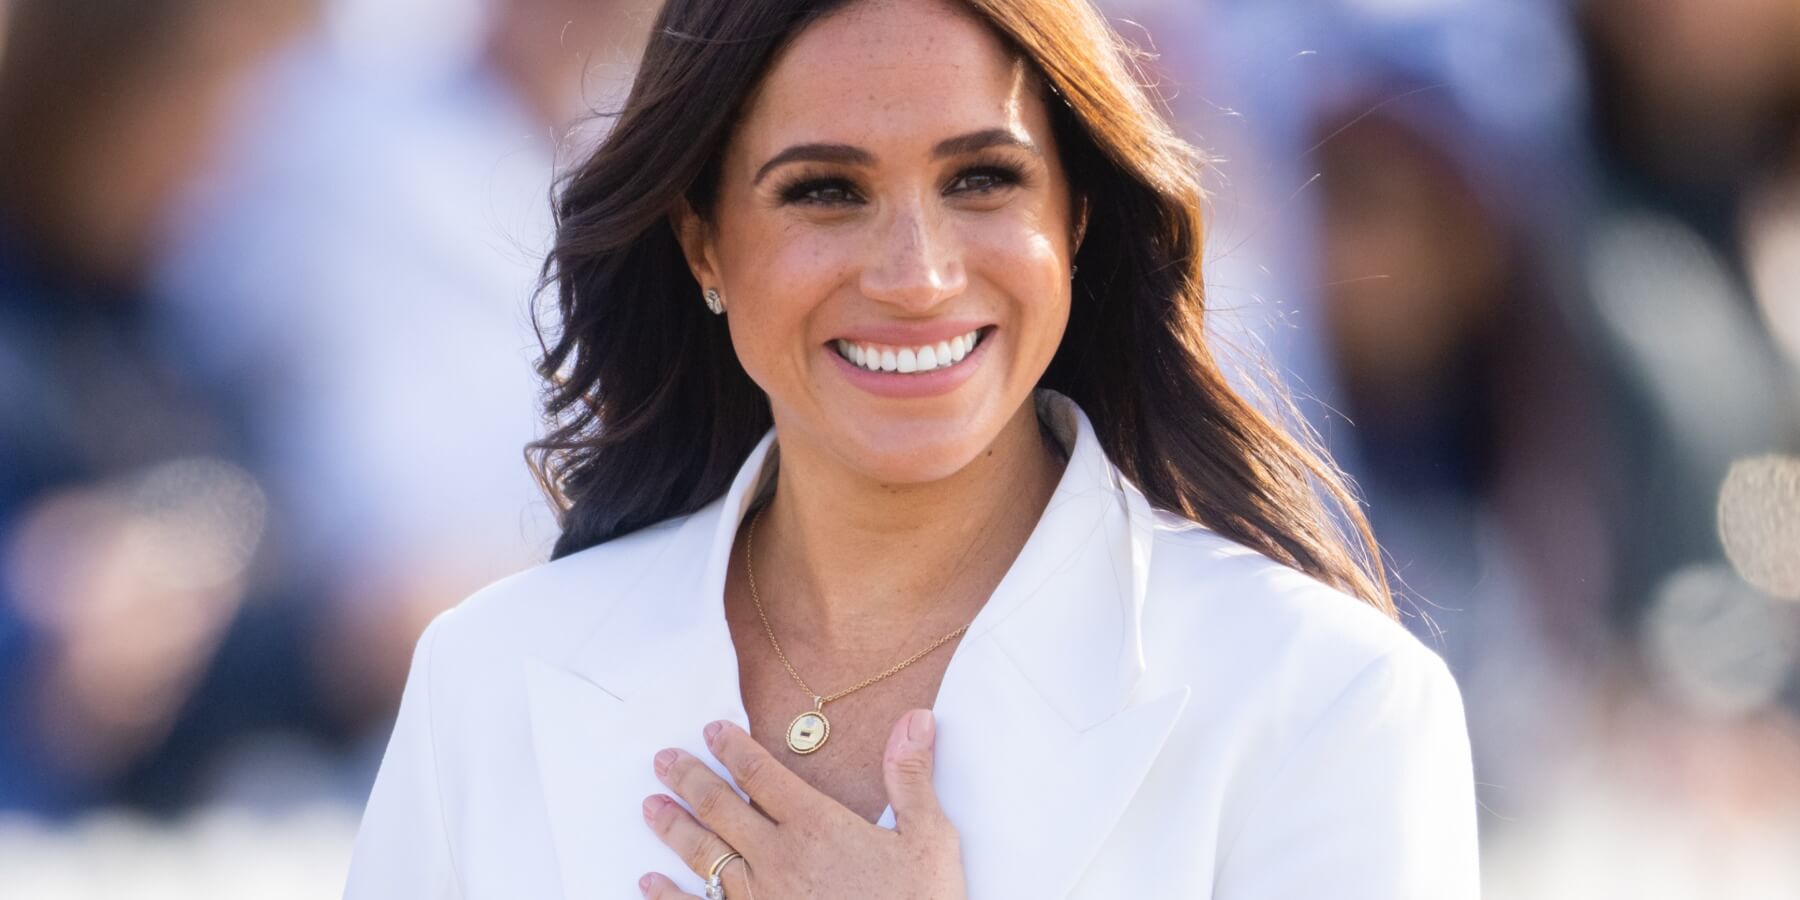 Meghan Markle's plays an intern in her newest acting gig.